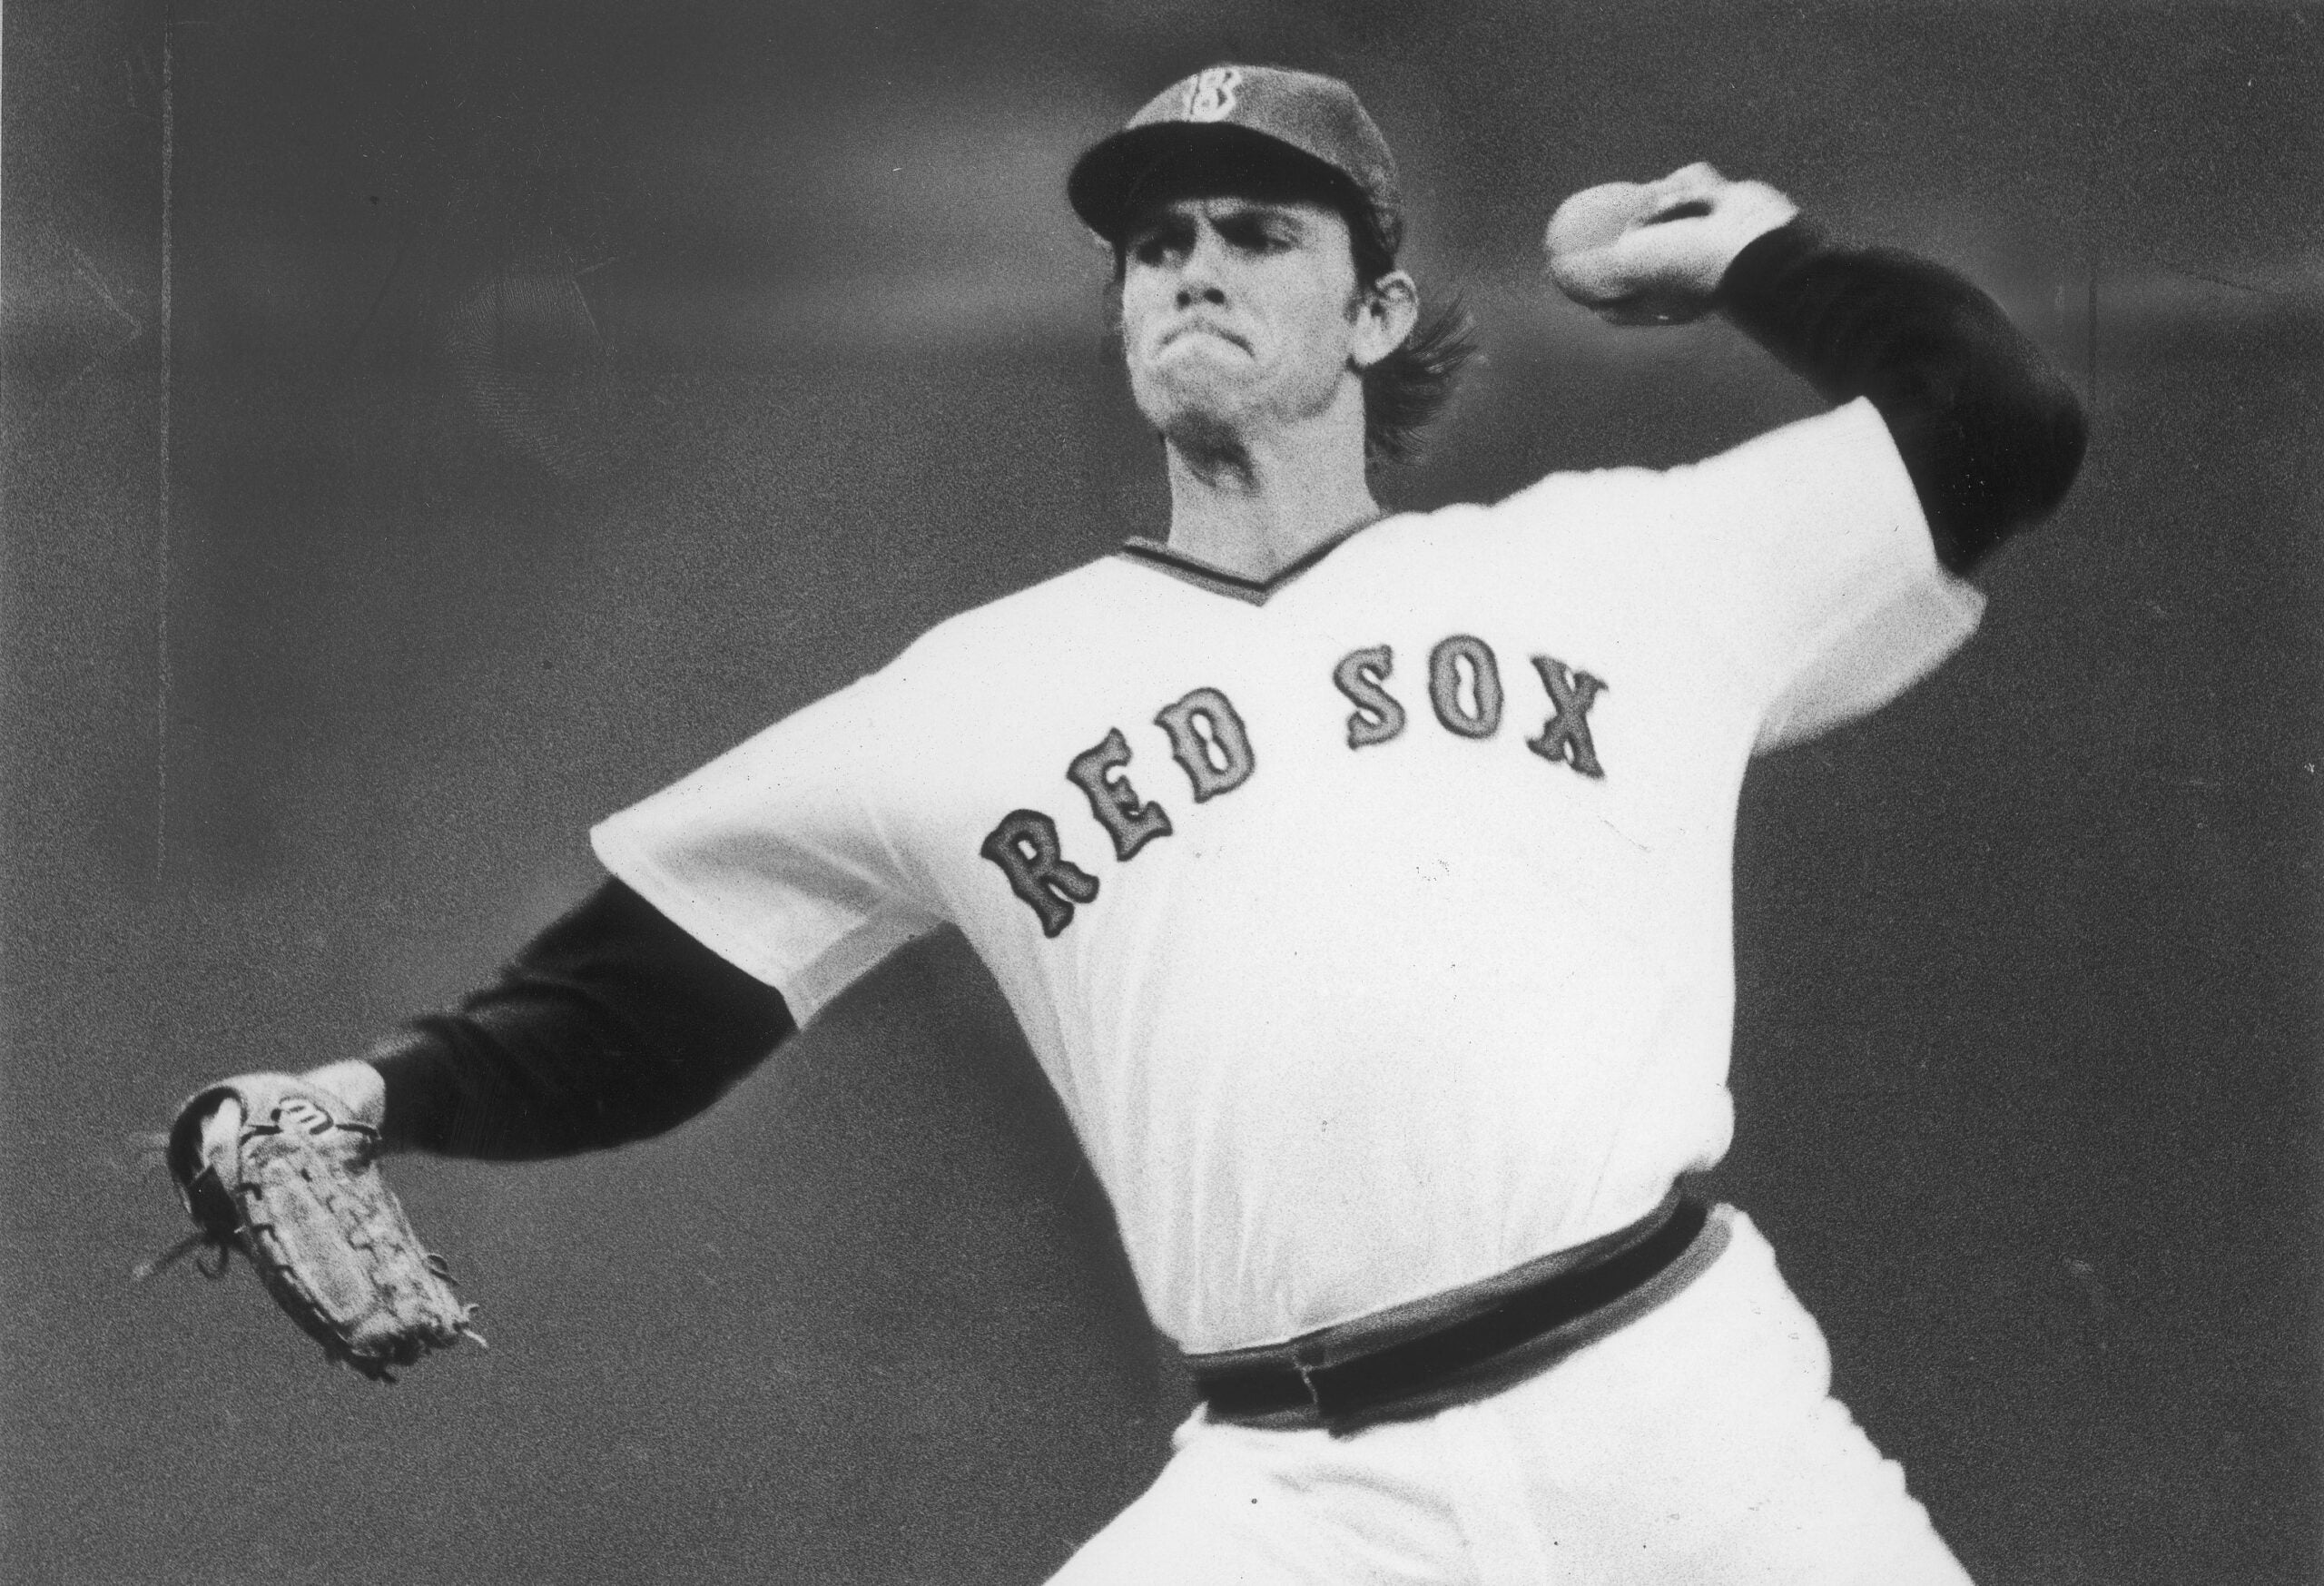 Former Red Sox pitcher Bill Lee, 75, collapses at exhibition game